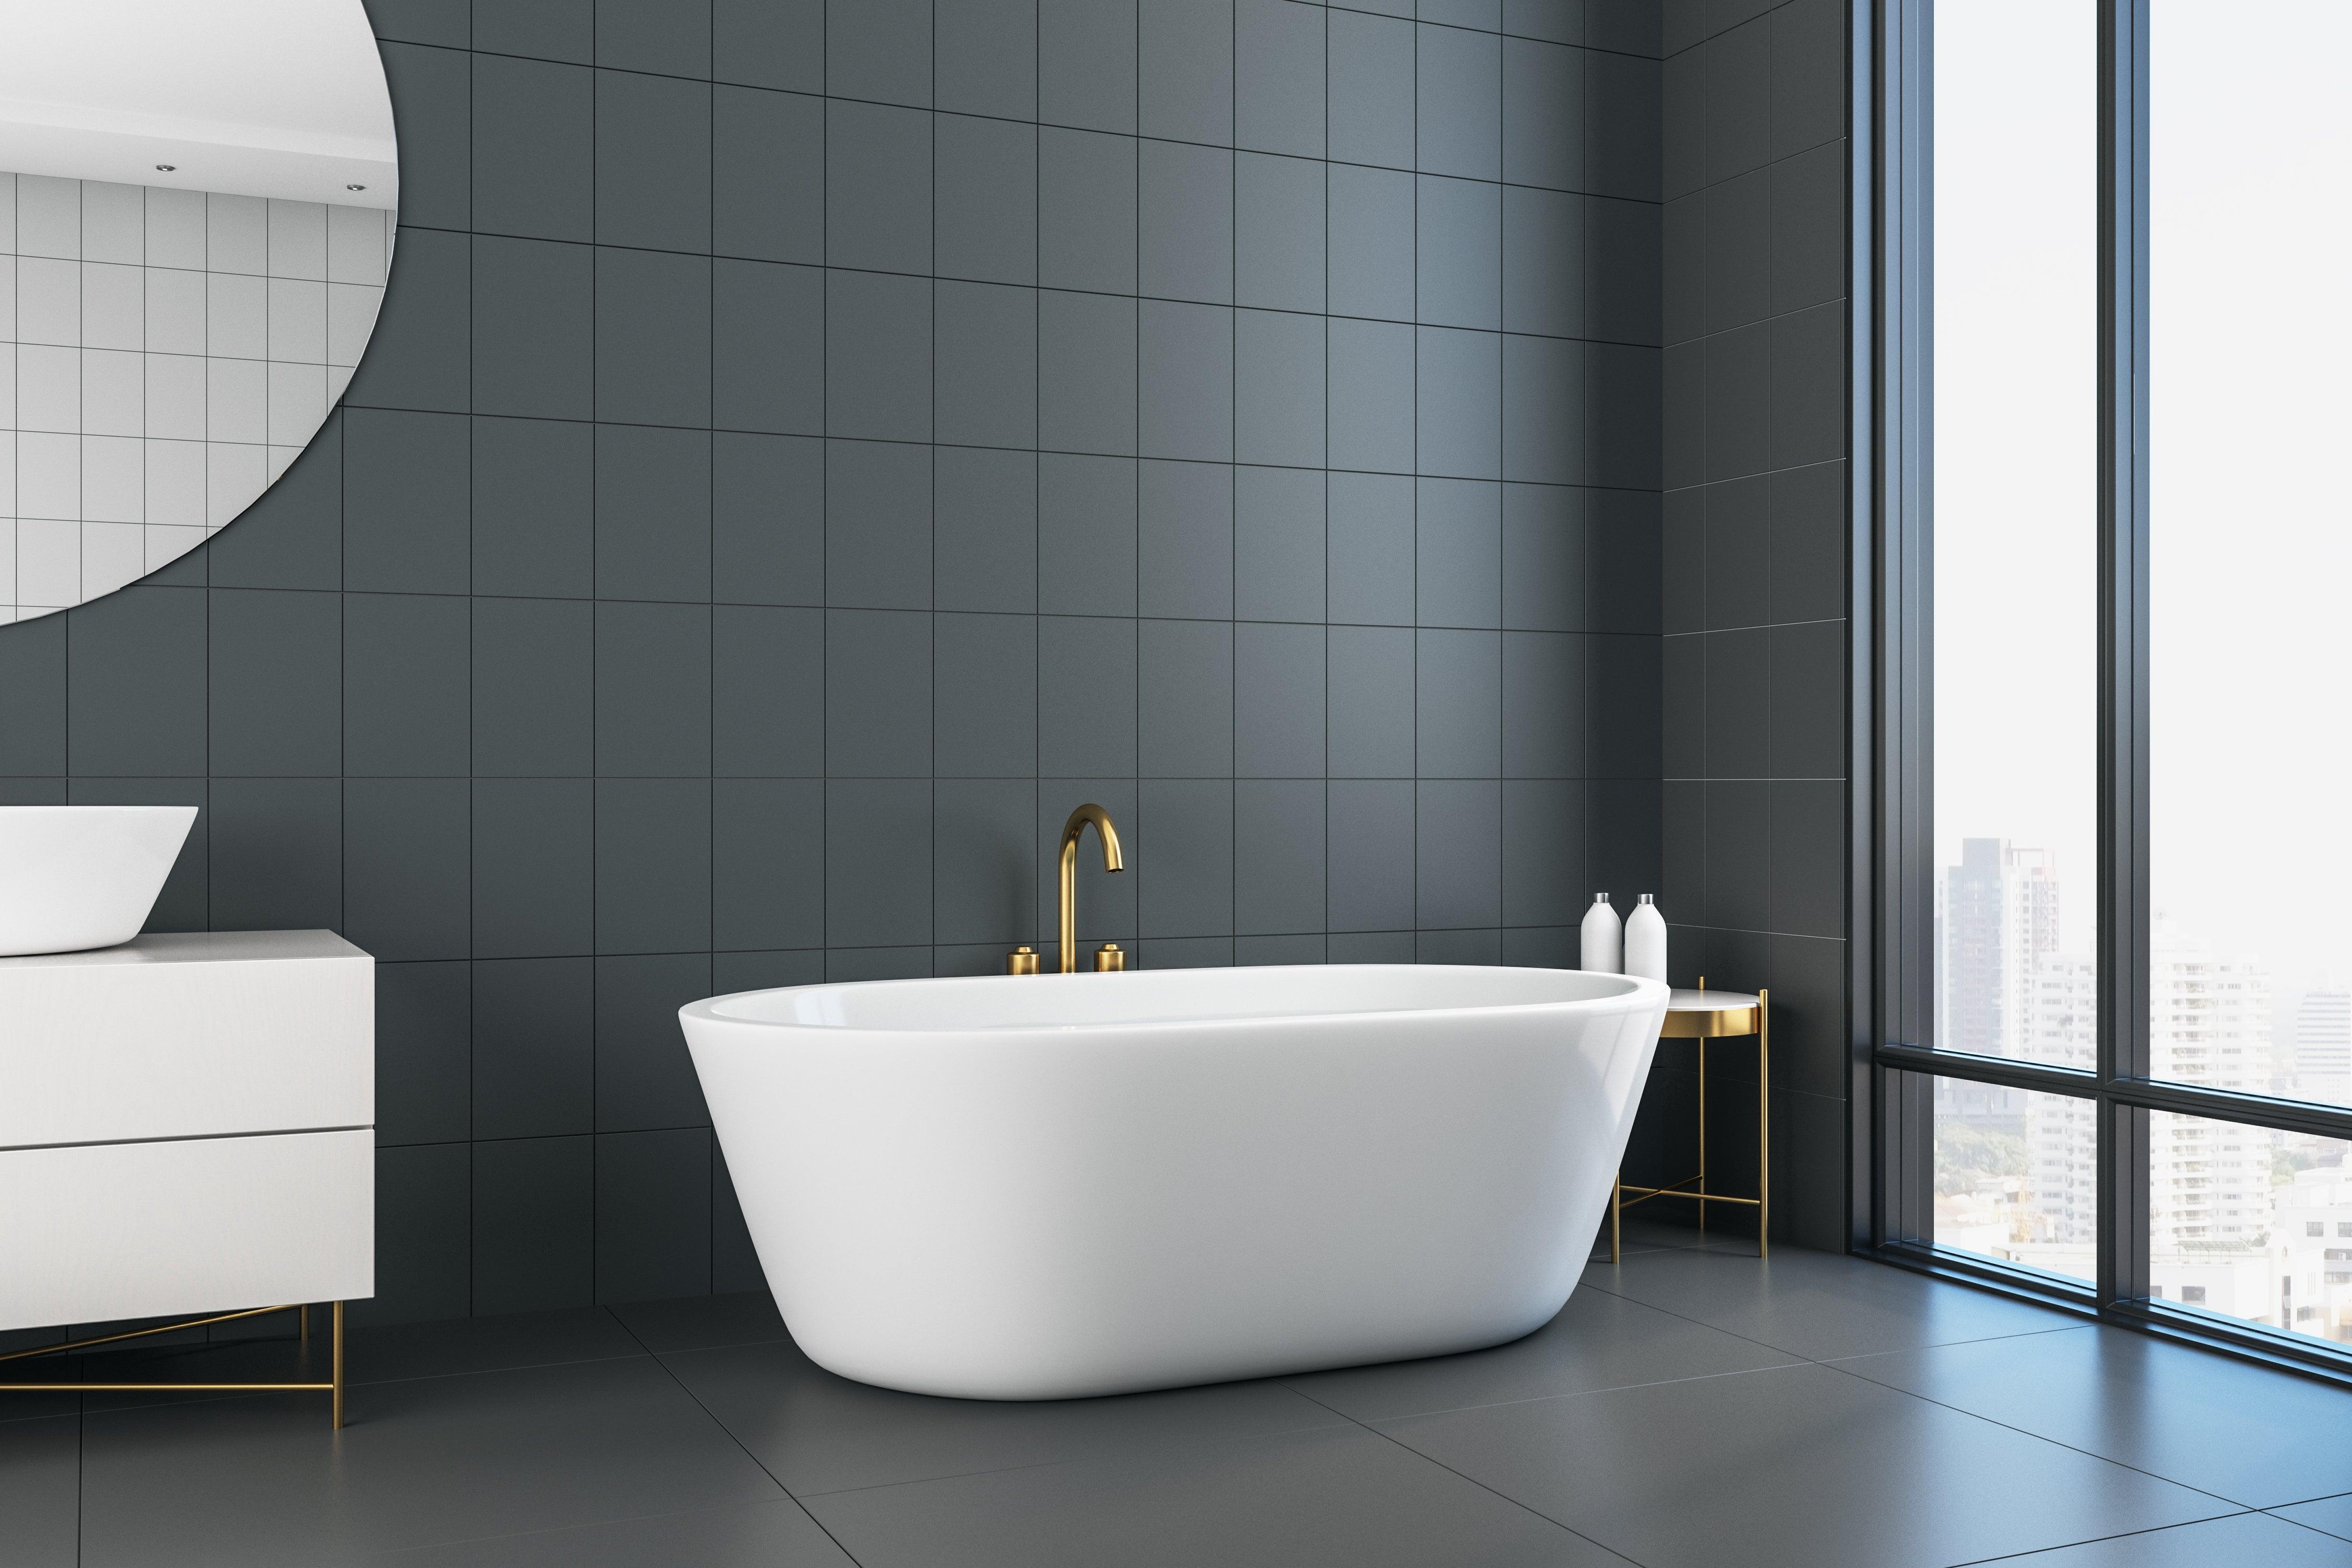 How To Add Value To Your Home With Bathroom Upgrades - Bathroom Design Center